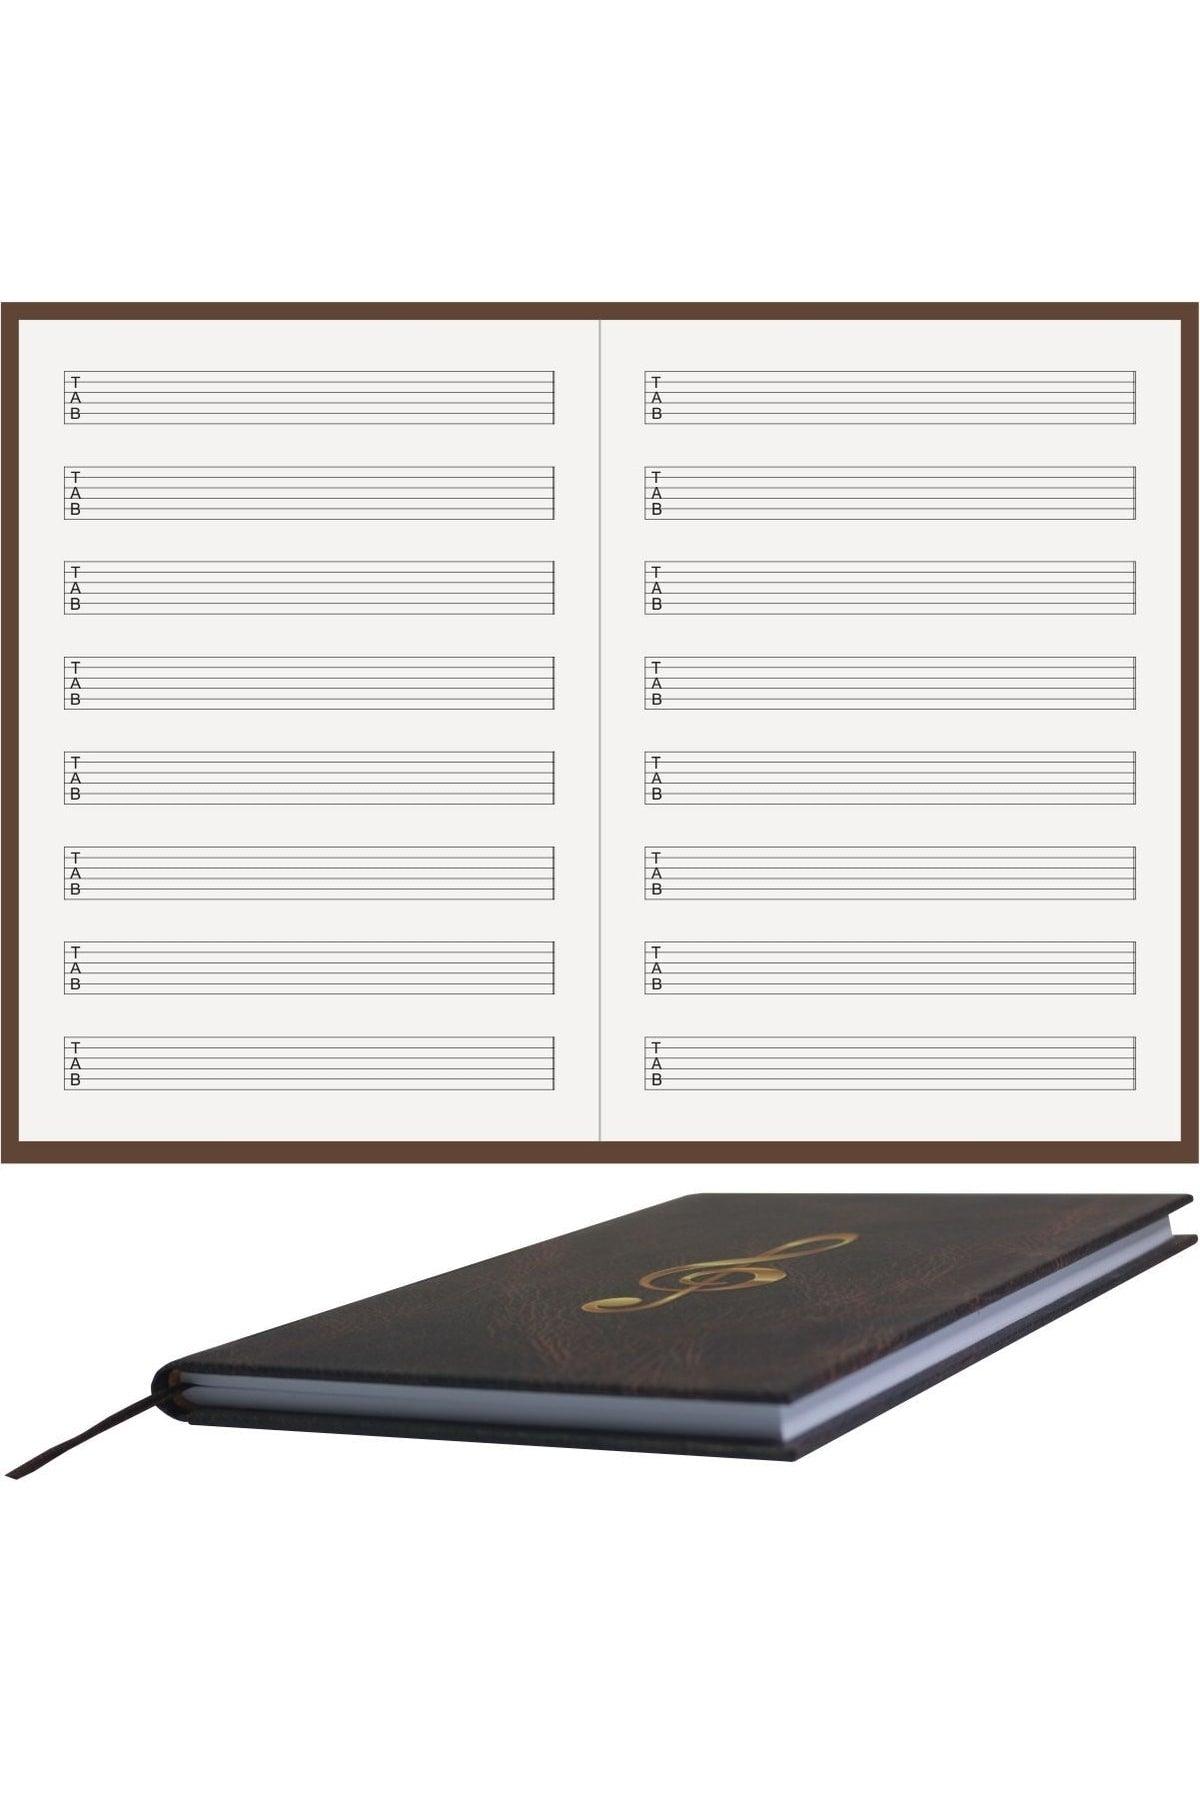 Guitar Notebook (Double Cutout with Tab Key